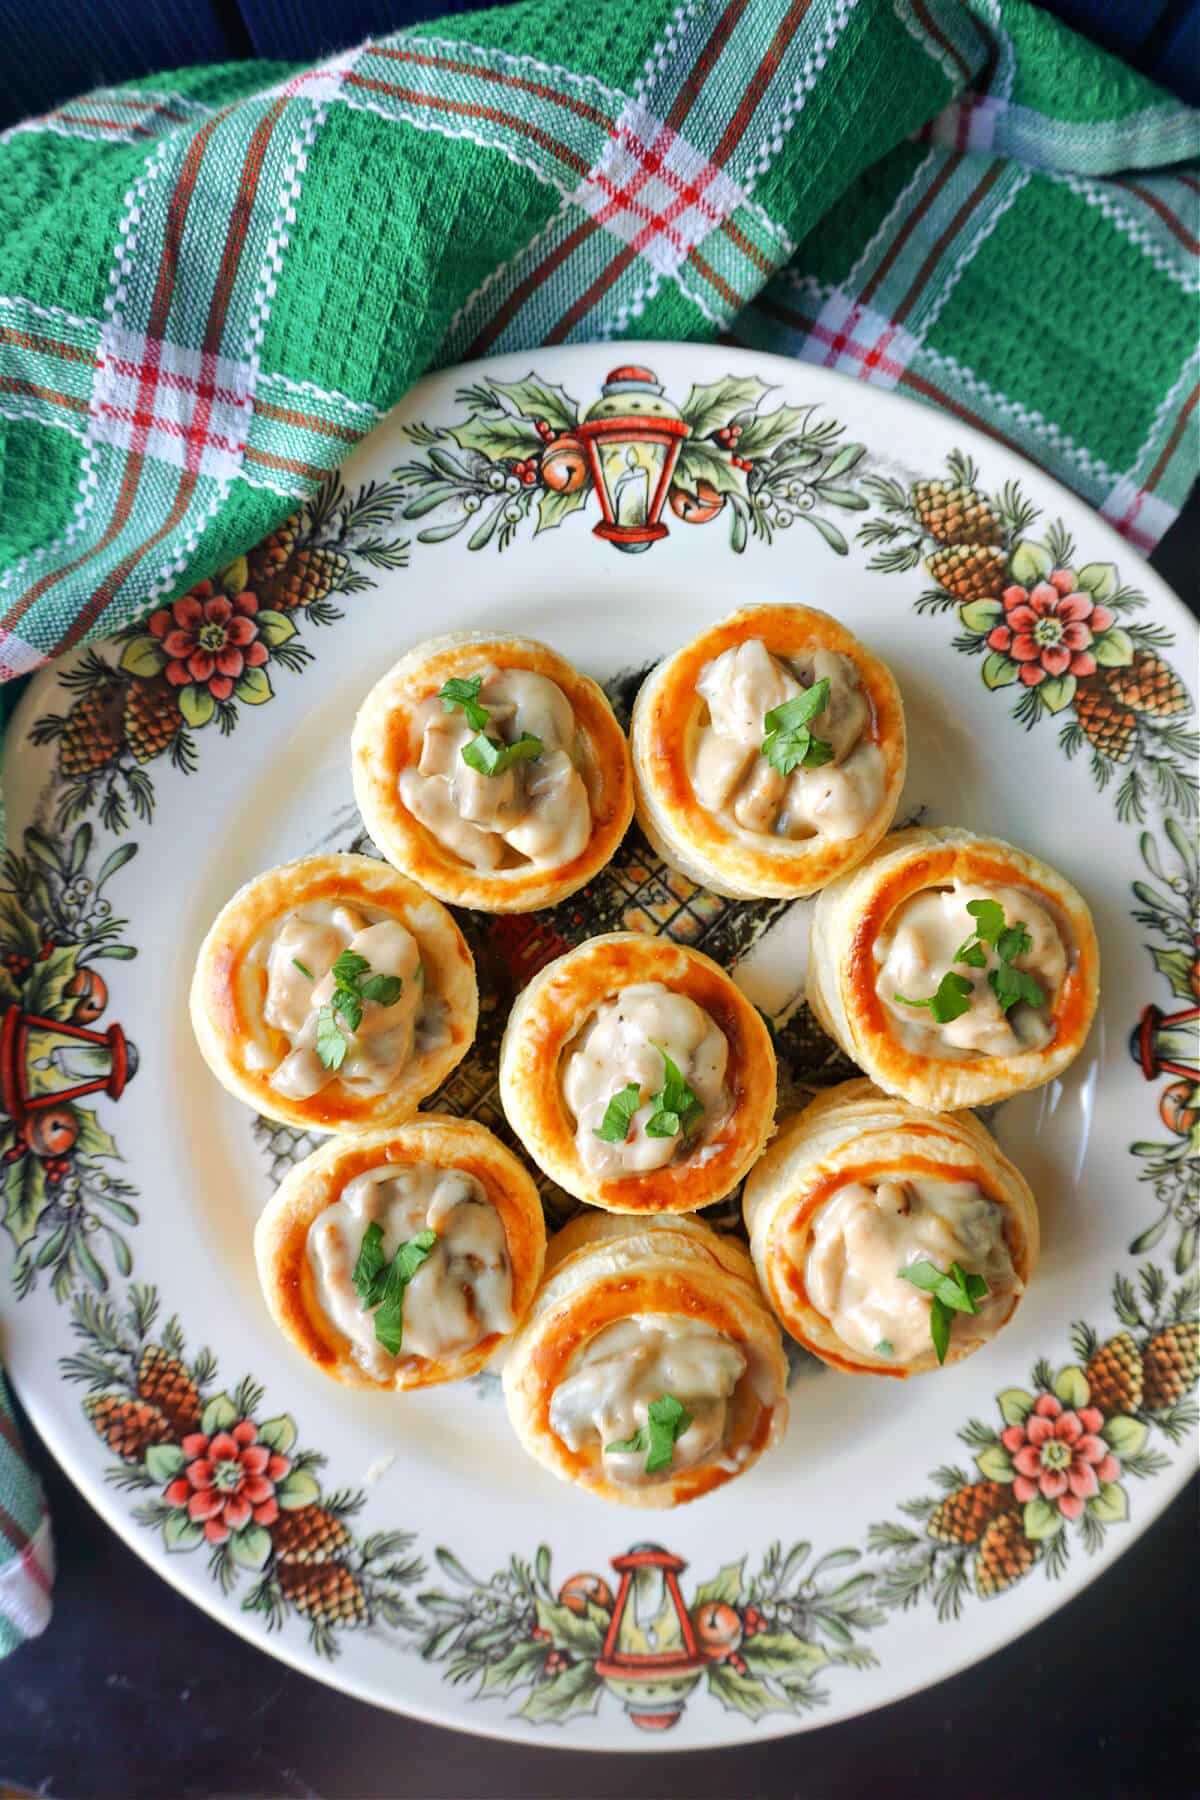 A plate with 8 filled vol-au-vents.